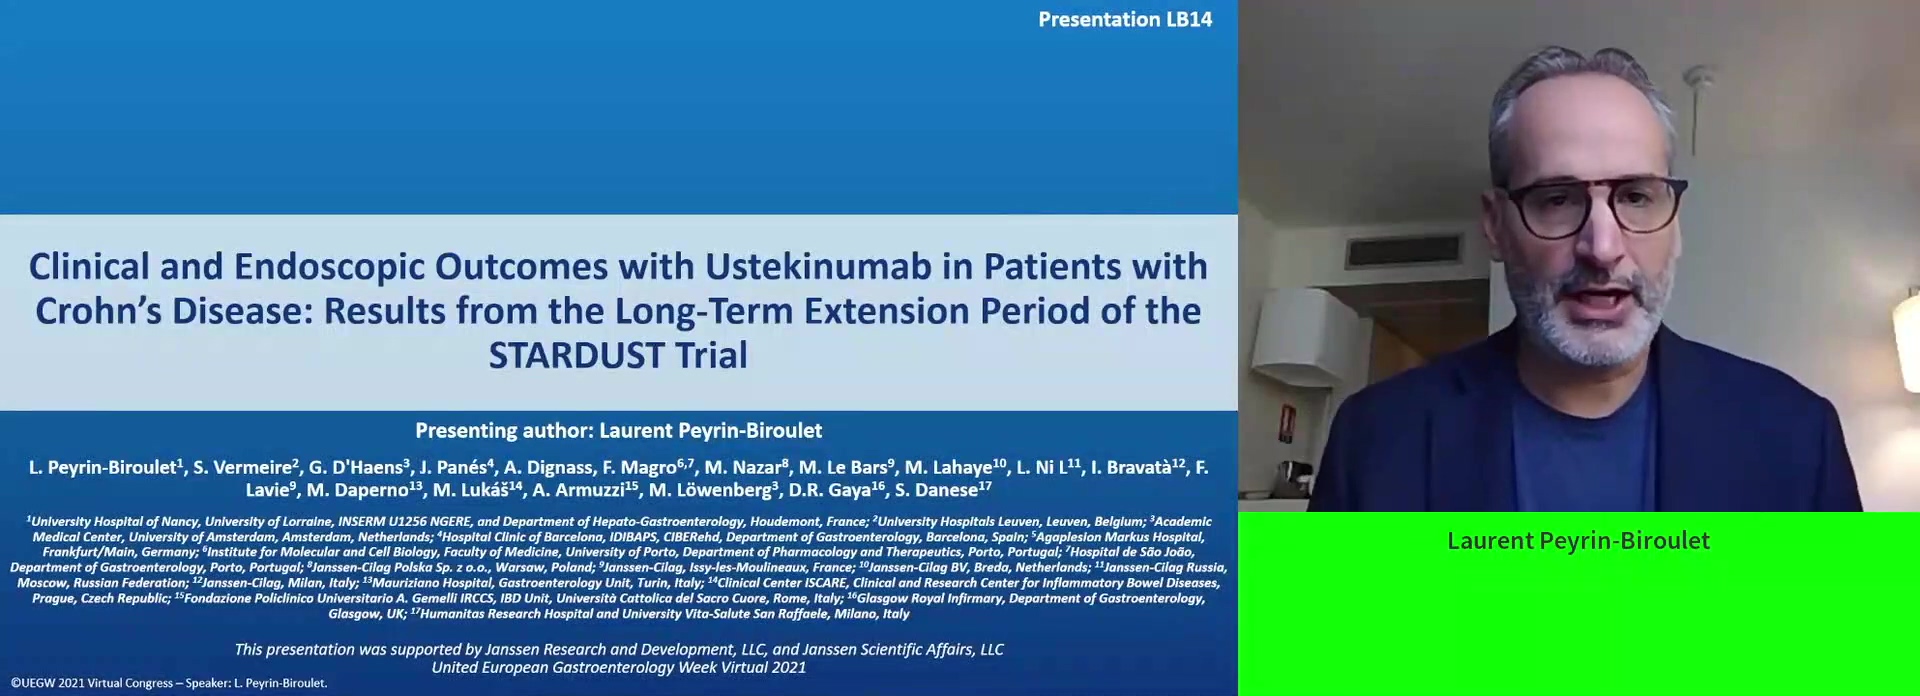 CLINICAL AND ENDOSCOPIC OUTCOMES WITH USTEKINUMAB IN PATIENTS WITH CROHN’S DISEASE: RESULTS FROM THE LONG-TERM EXTENSION PERIOD OF THE STARDUST TRIAL